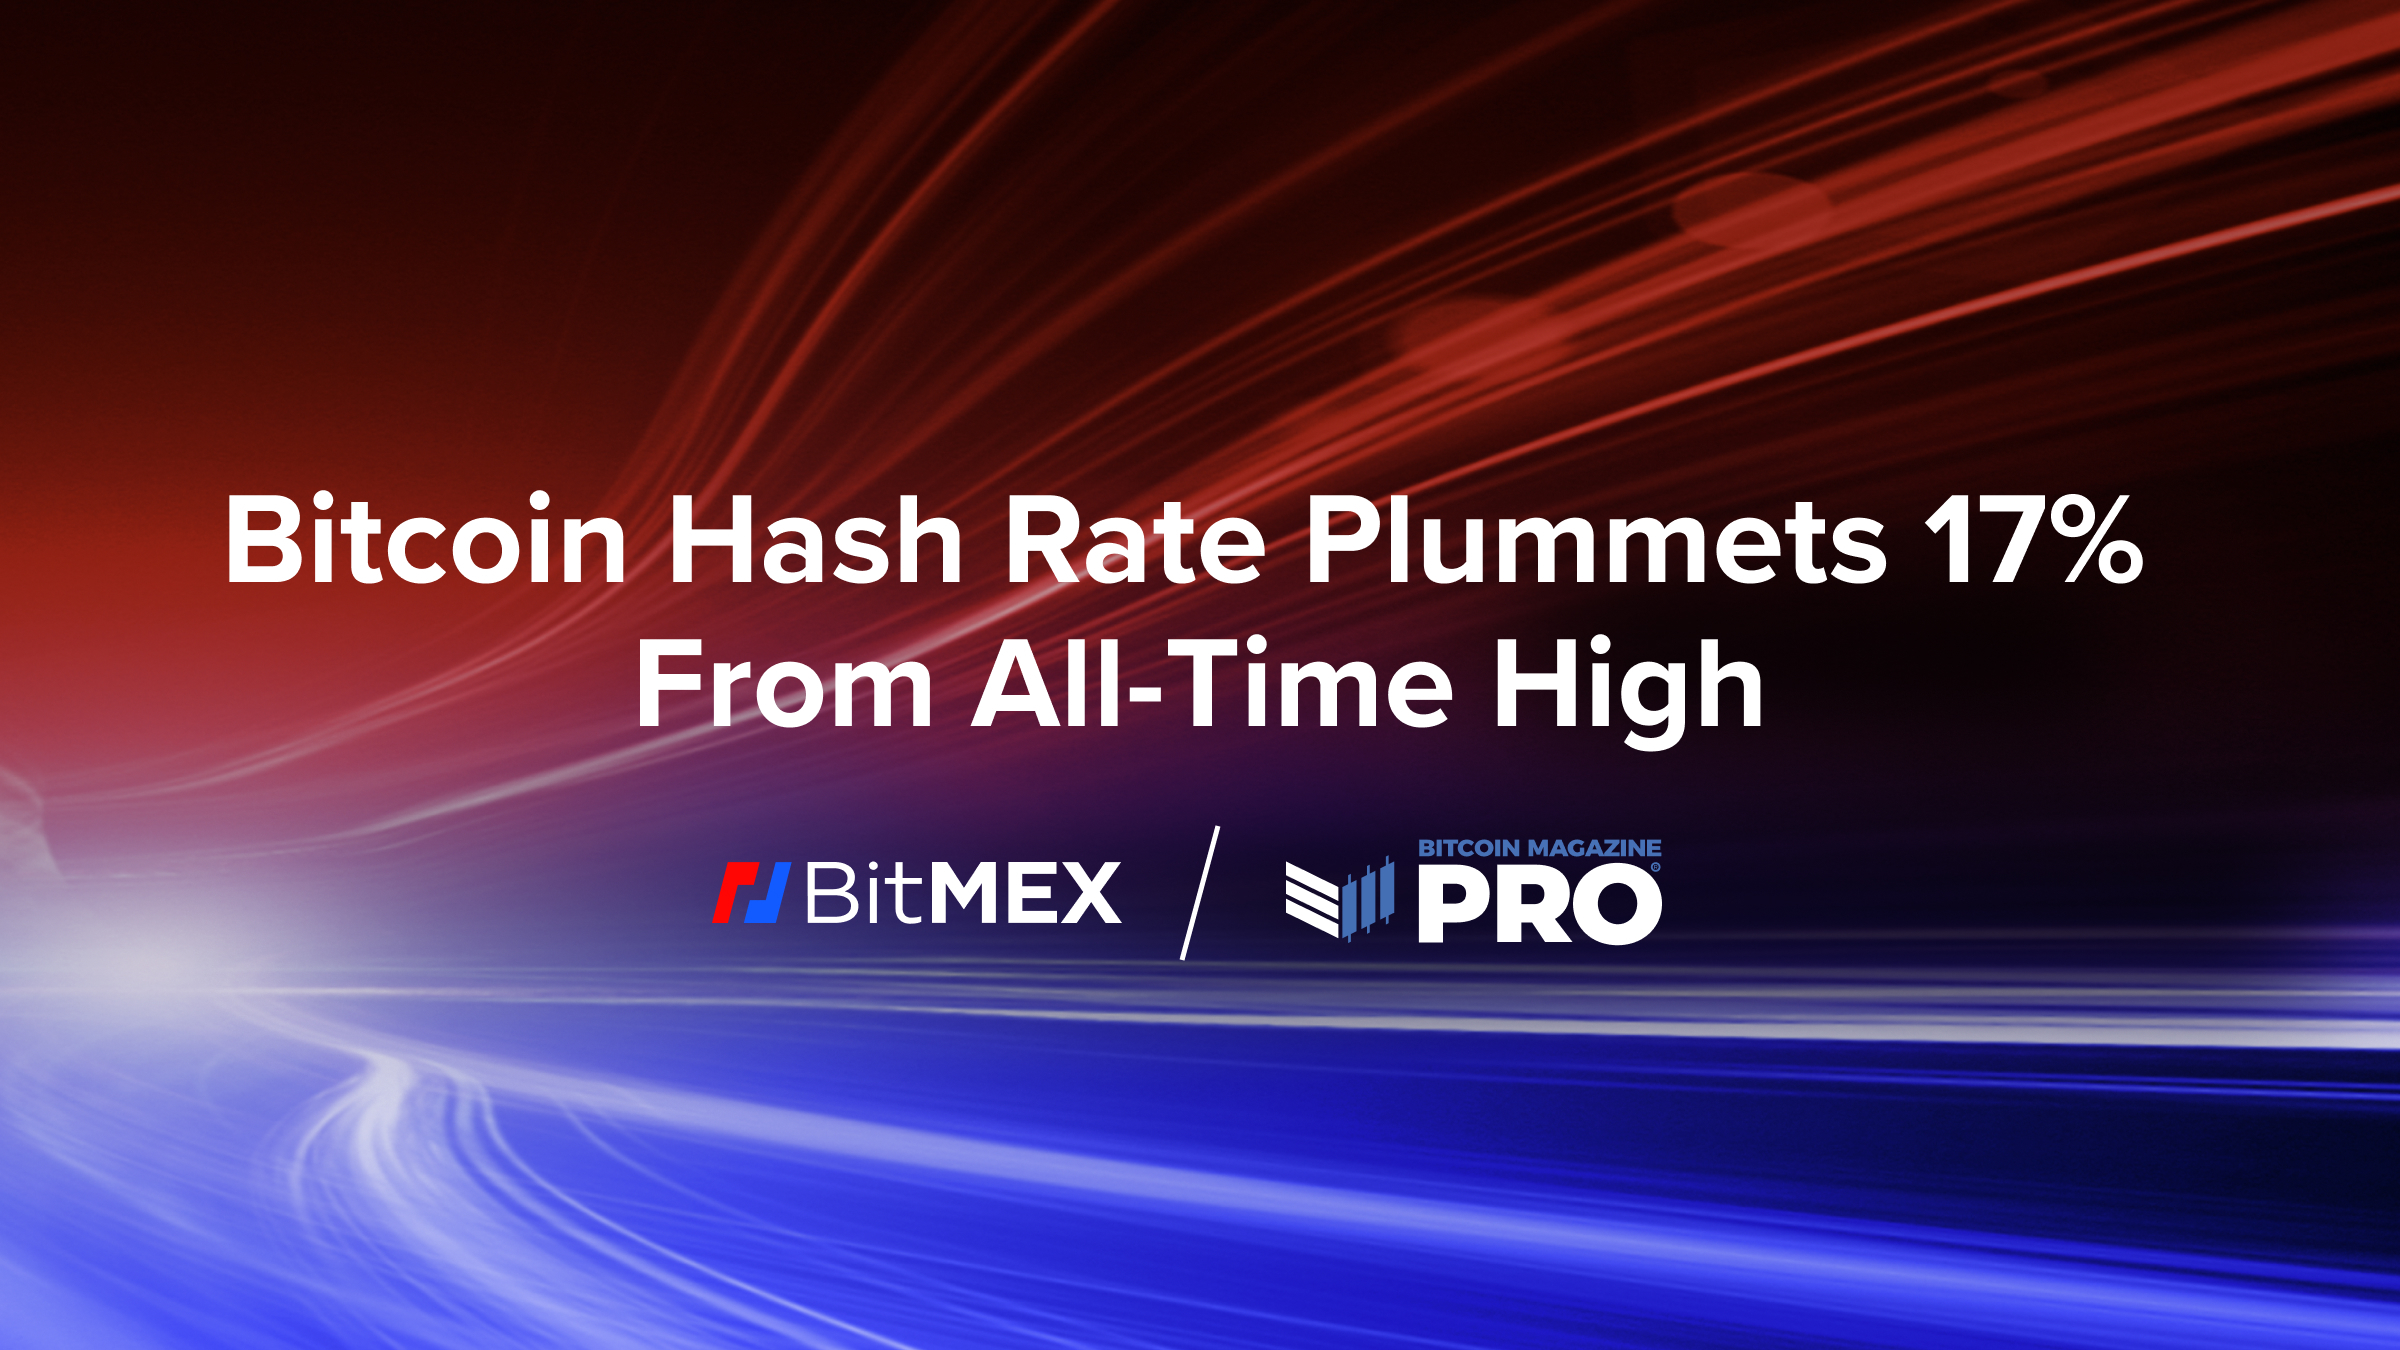 Bitcoin Hash Rate Plummets 17% From All-Time High